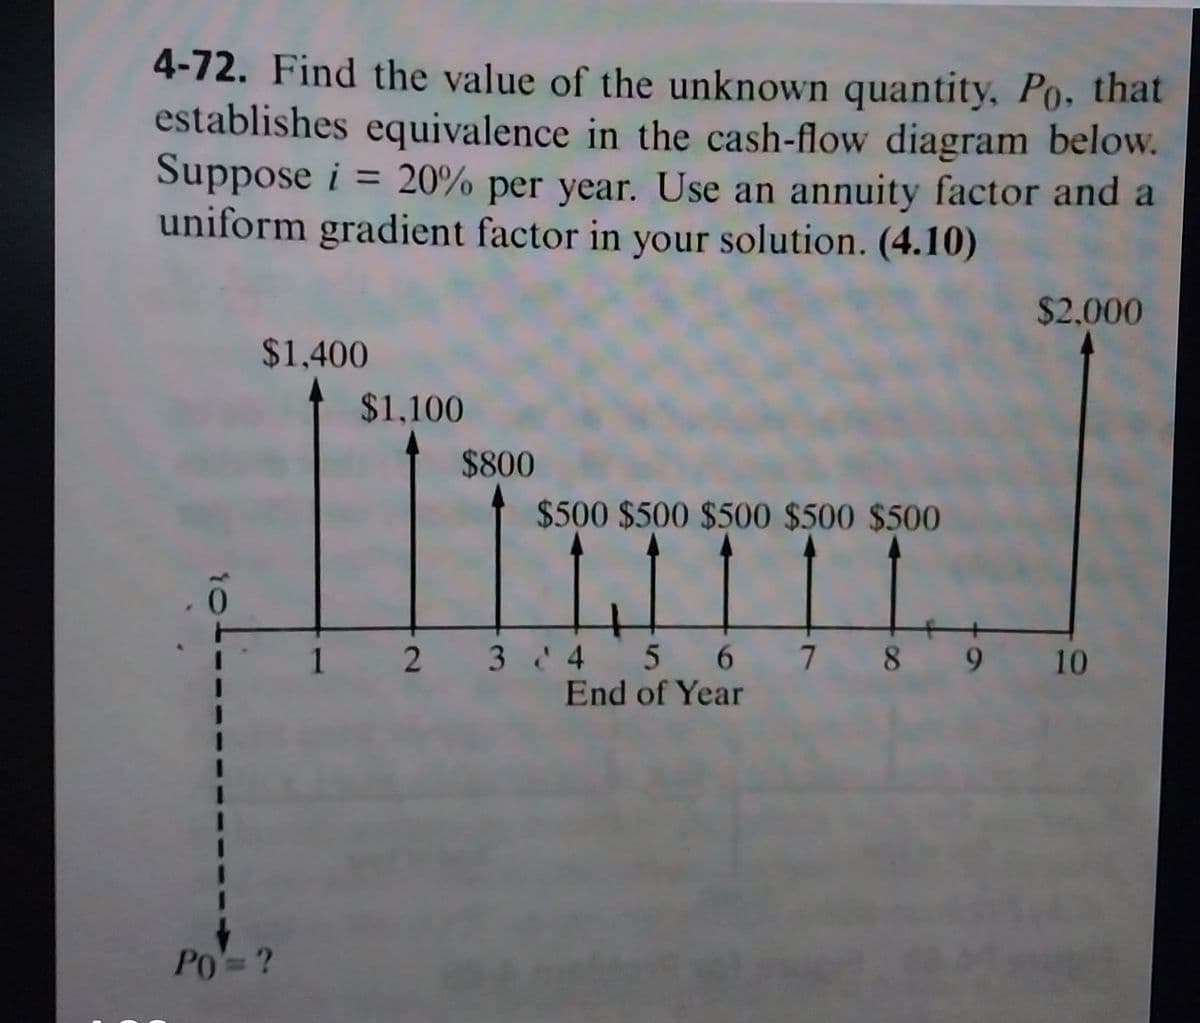 4-72. Find the value of the unknown quantity, Po, that
establishes equivalence in the cash-flow diagram below.
Suppose i = 20% per year. Use an annuity factor and a
uniform gradient factor in your solution. (4.10)
$1,400
PO = ?
1
$1,100
2
$800
$500 $500 $500 $500 $500
11
5 6
End of Year
3 24
789
$2,000
10